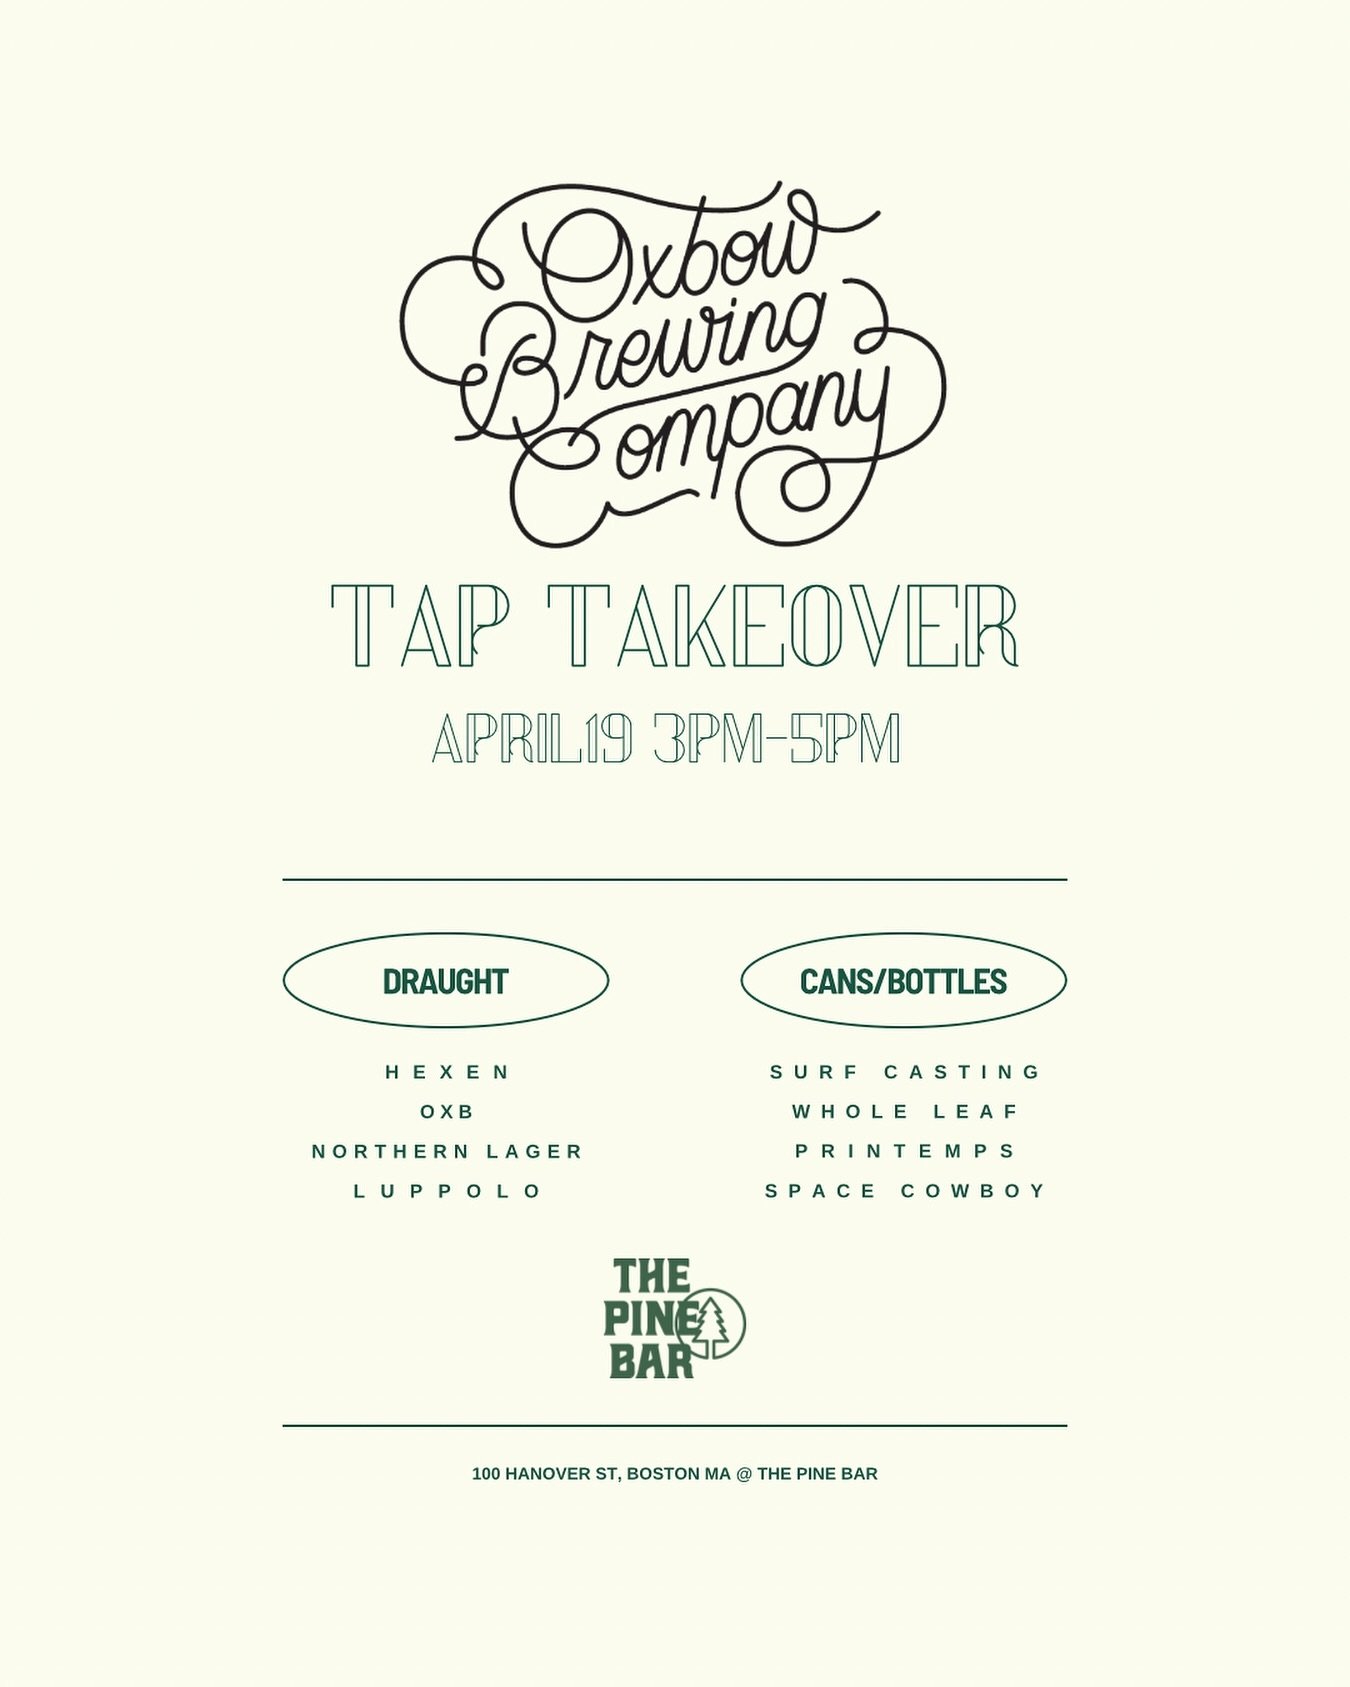 We&rsquo;re doing a tap takeover with @oxbowbrewingcompany on April 19 at 3pm! Don&rsquo;t miss out on enjoying some great local beer 🍻🙌

#ontap #beer #thingstodoinboston #visitboston #drinklocal #oxbowbrewing